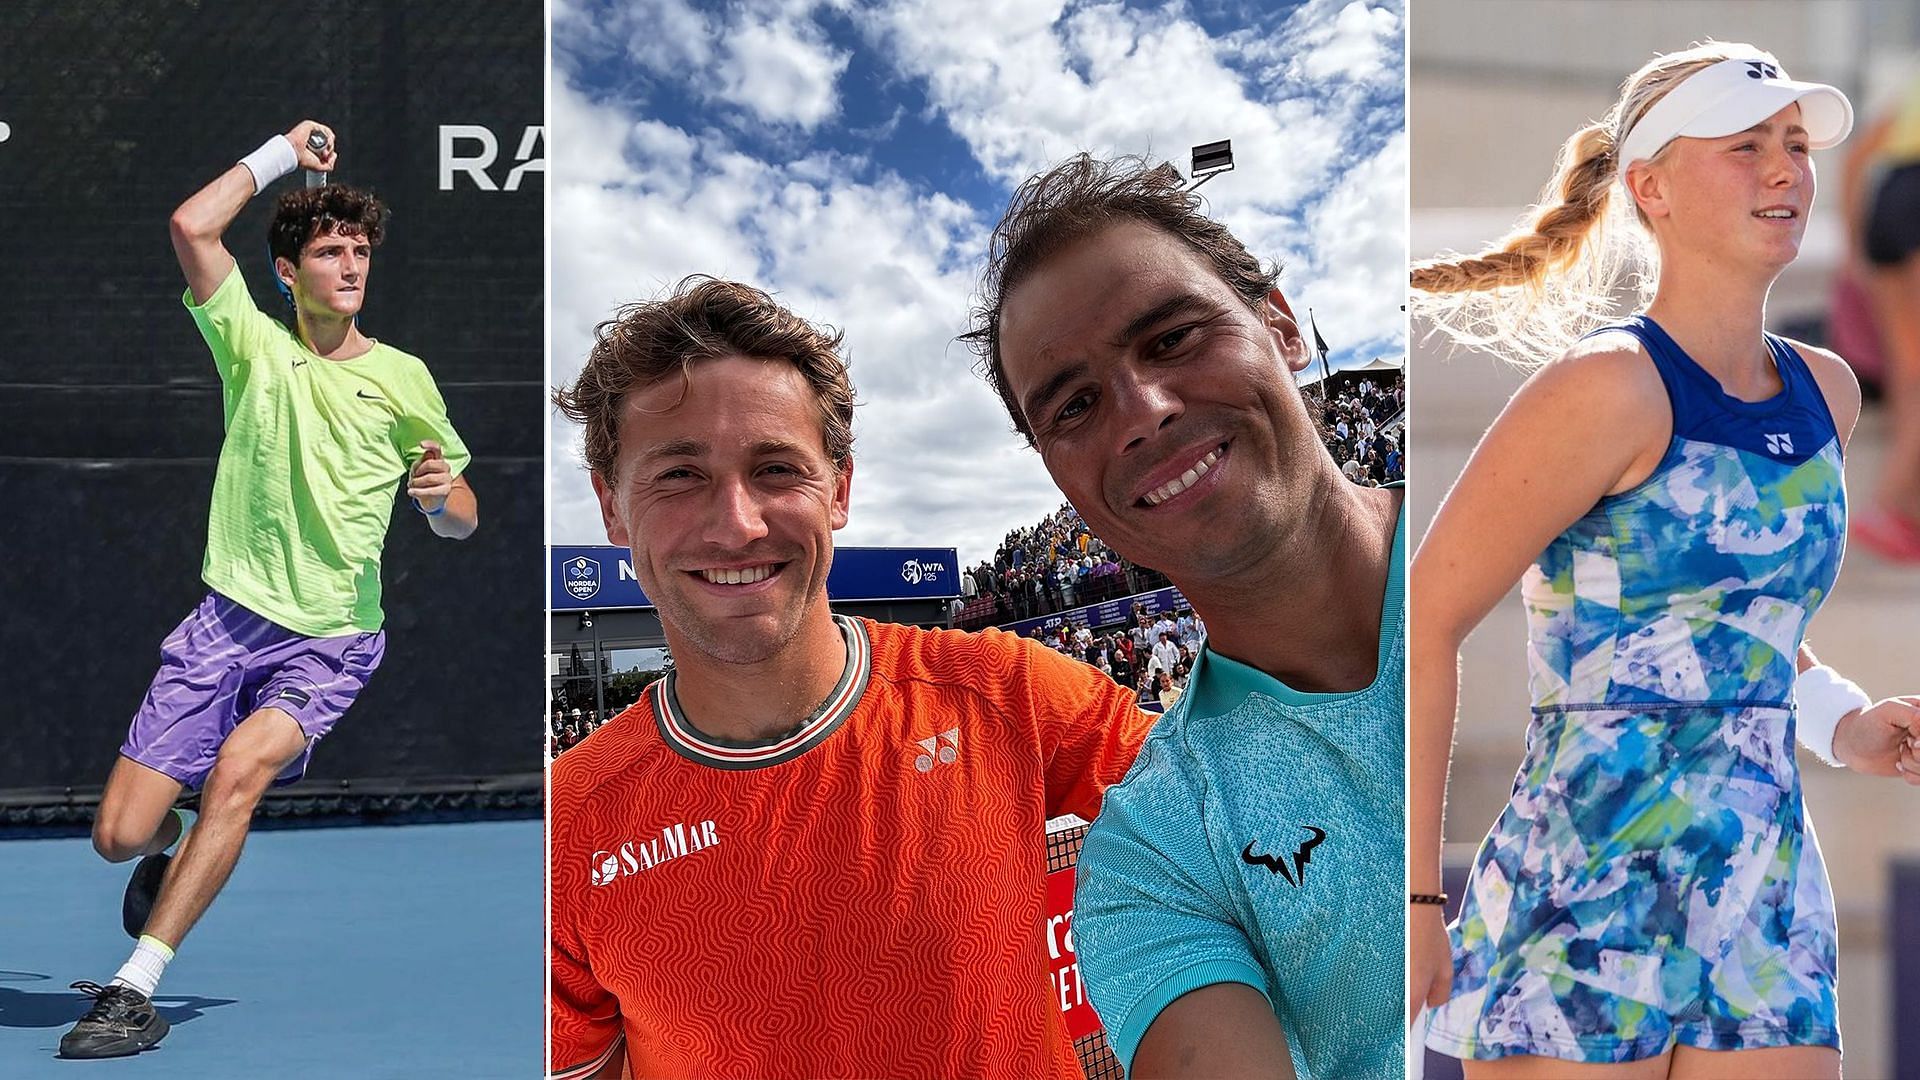 Rafael Nadal’s cousin Joan and Casper Ruud’s sister Charlotte banter about own partnership amid the pair’s doubles stint at Nordea Open in Bastad